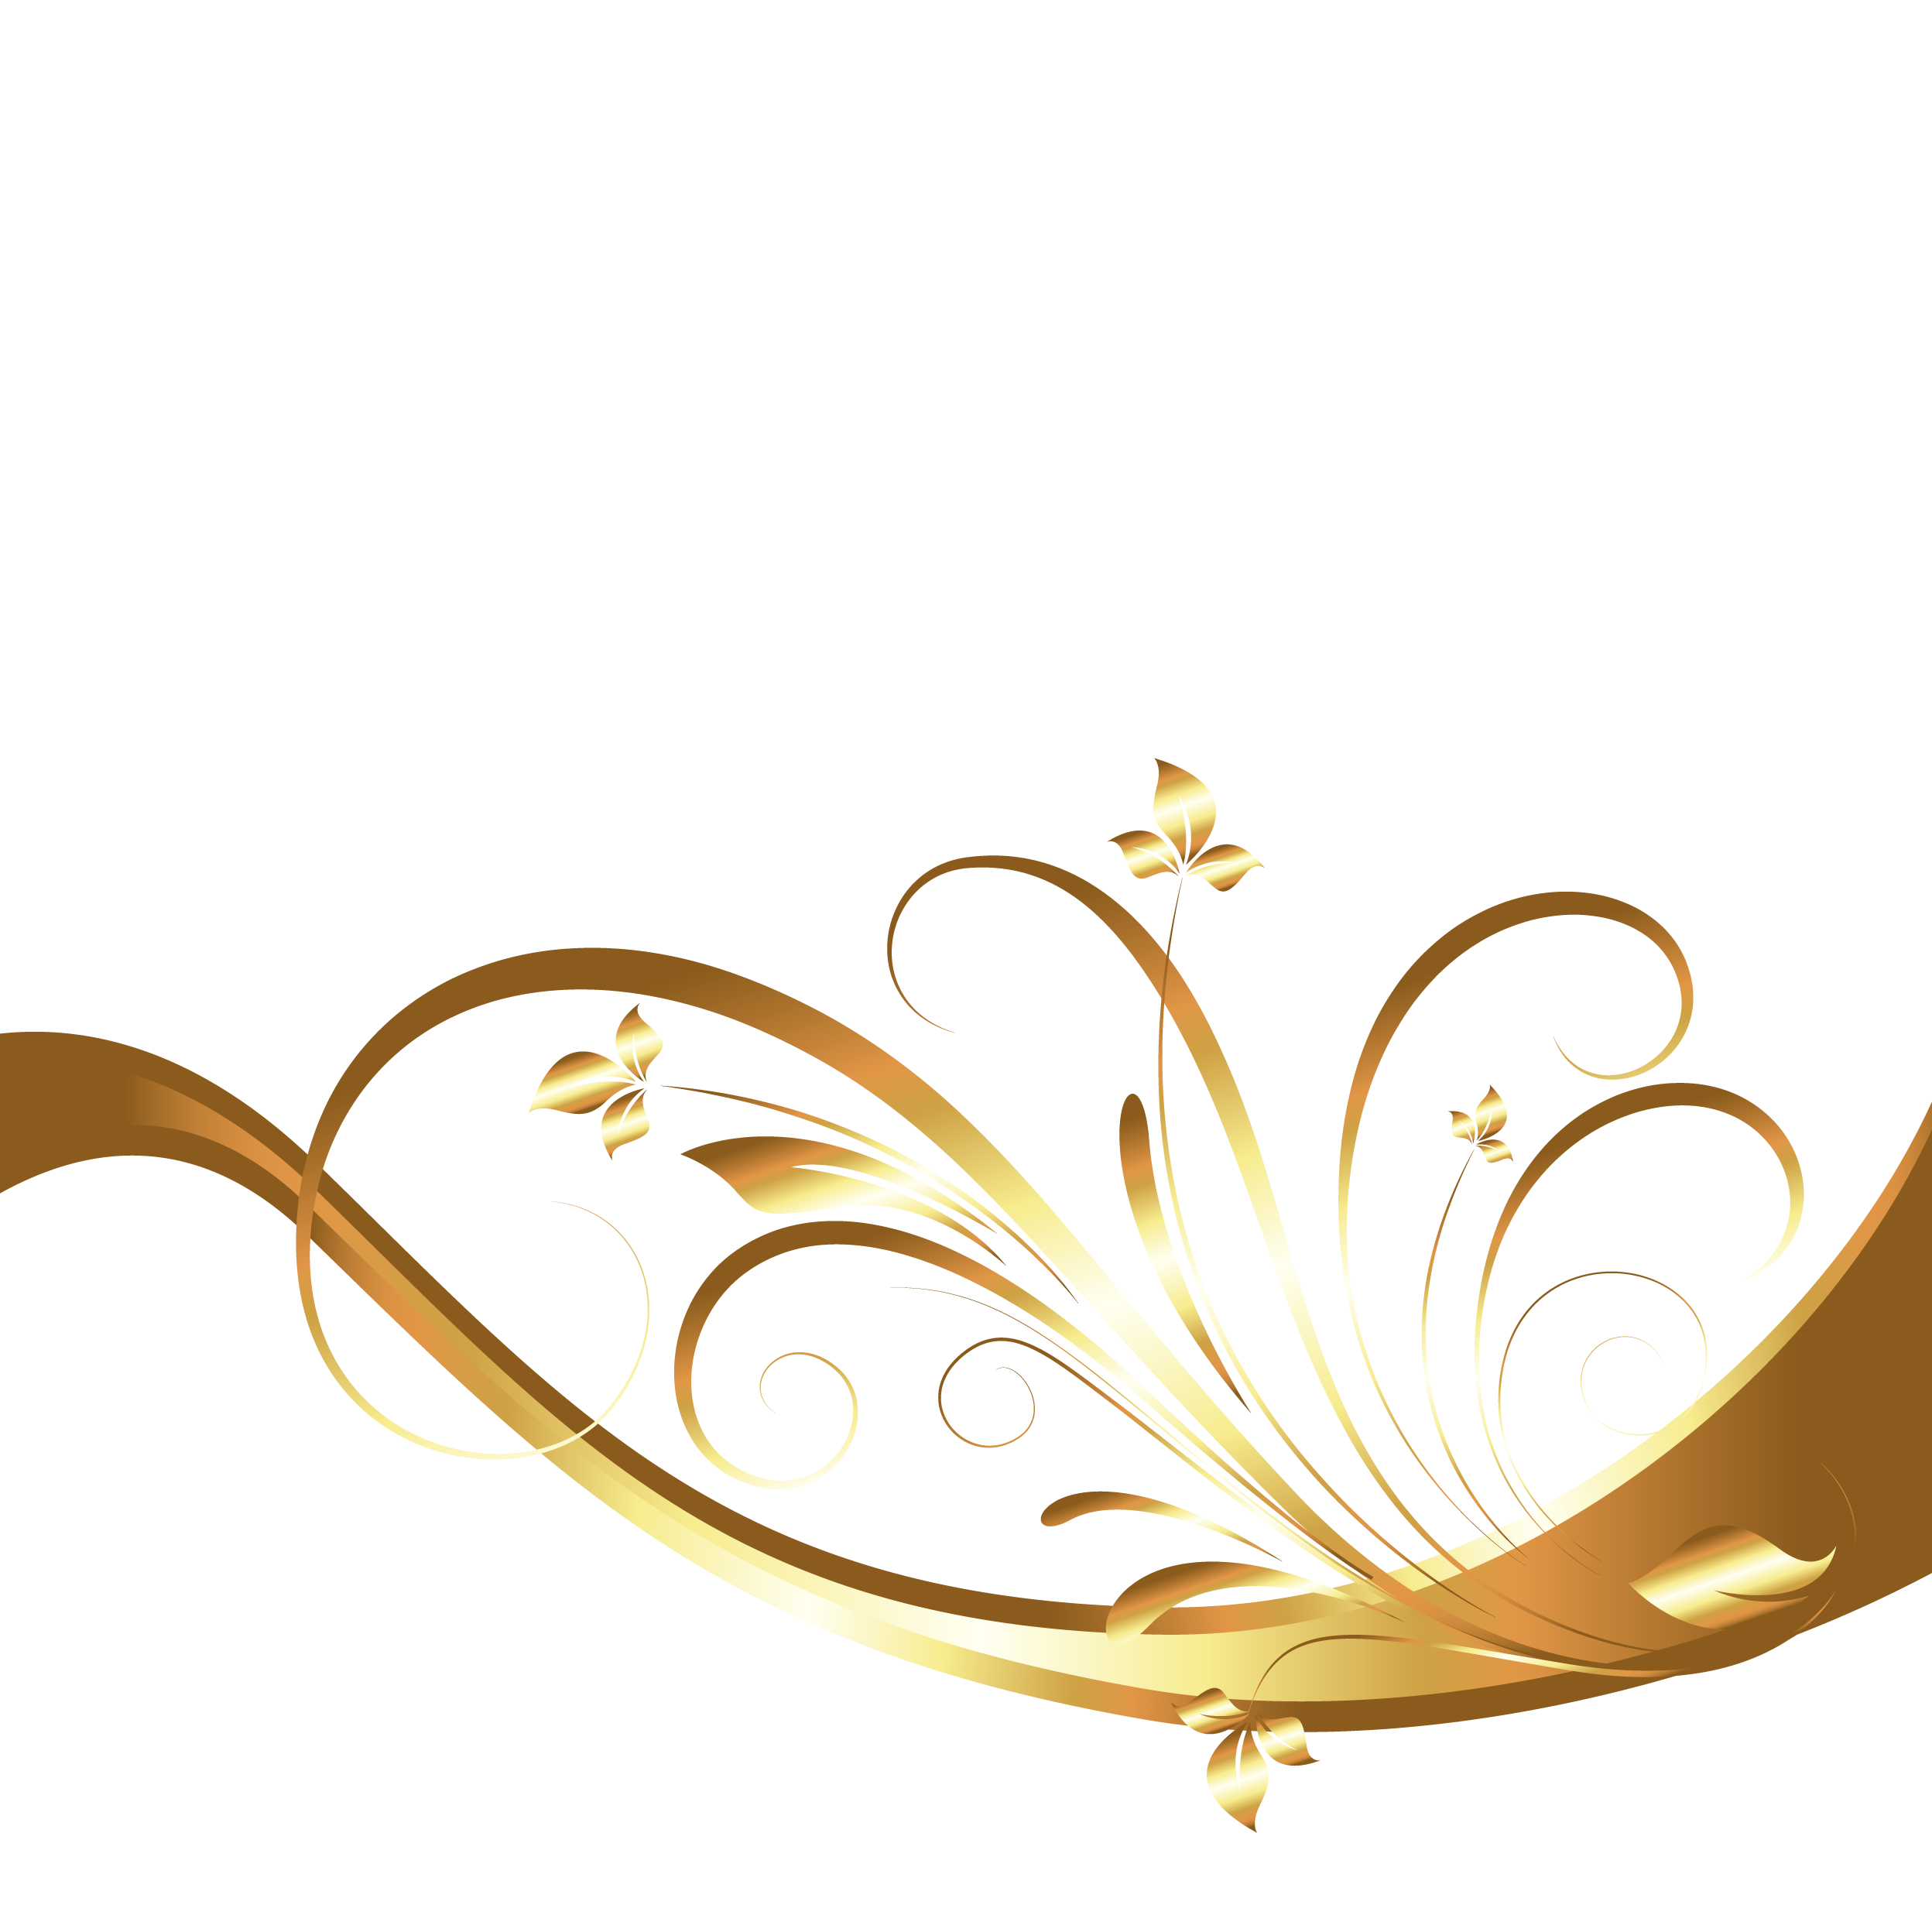 Abstraction Gold Abstract Computer Design Luxury File Clipart